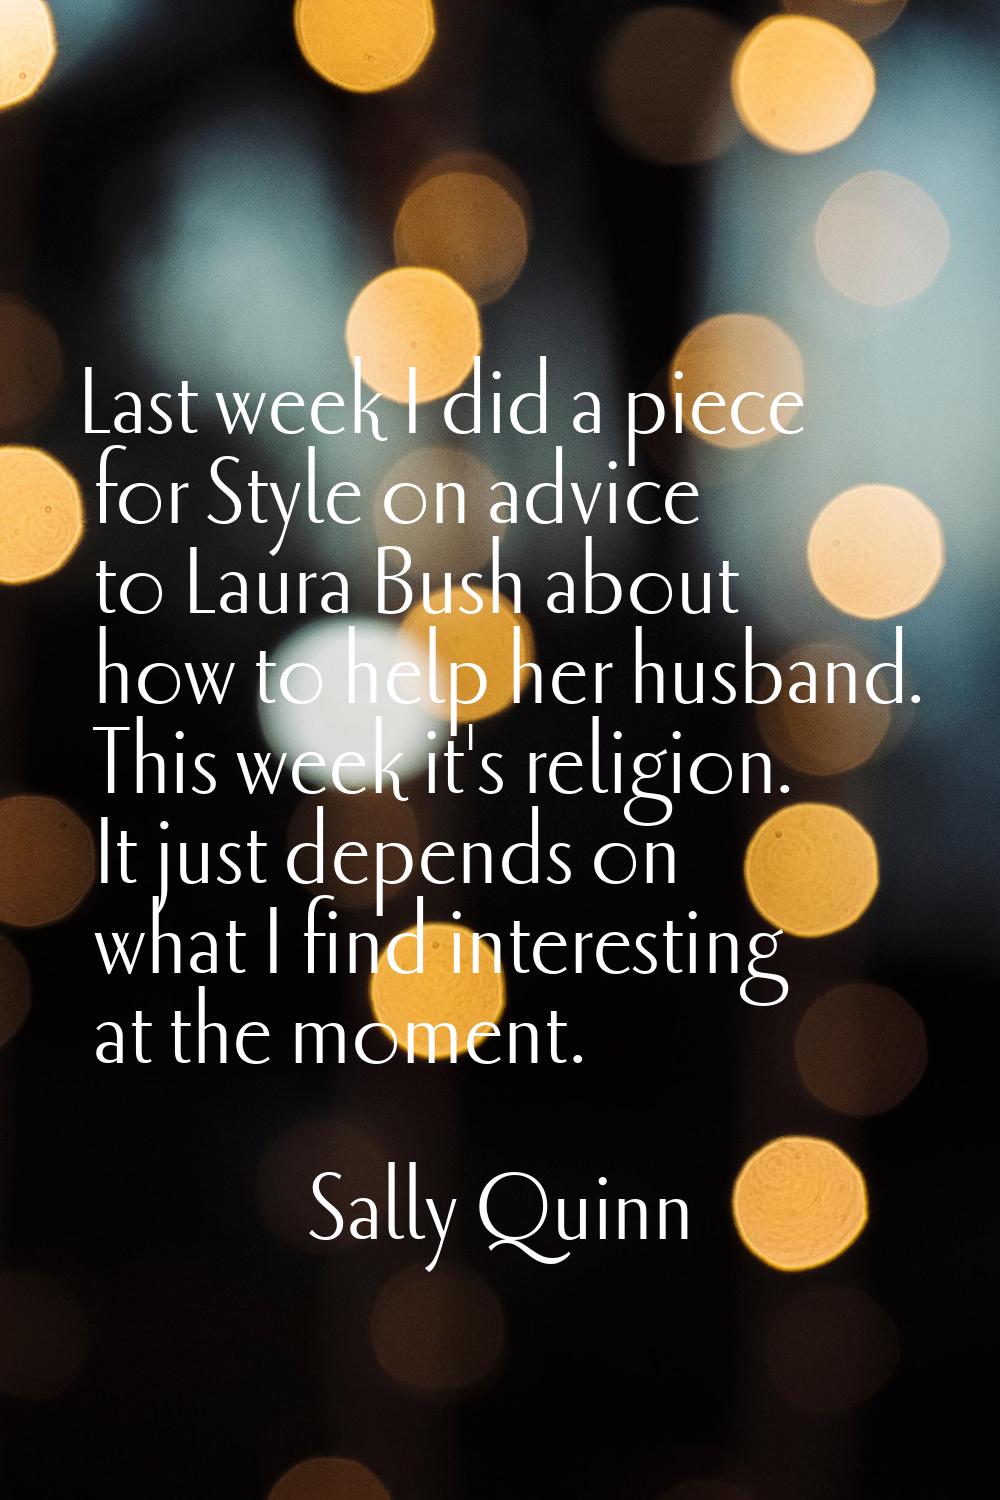 Last week I did a piece for Style on advice to Laura Bush about how to help her husband. This week 